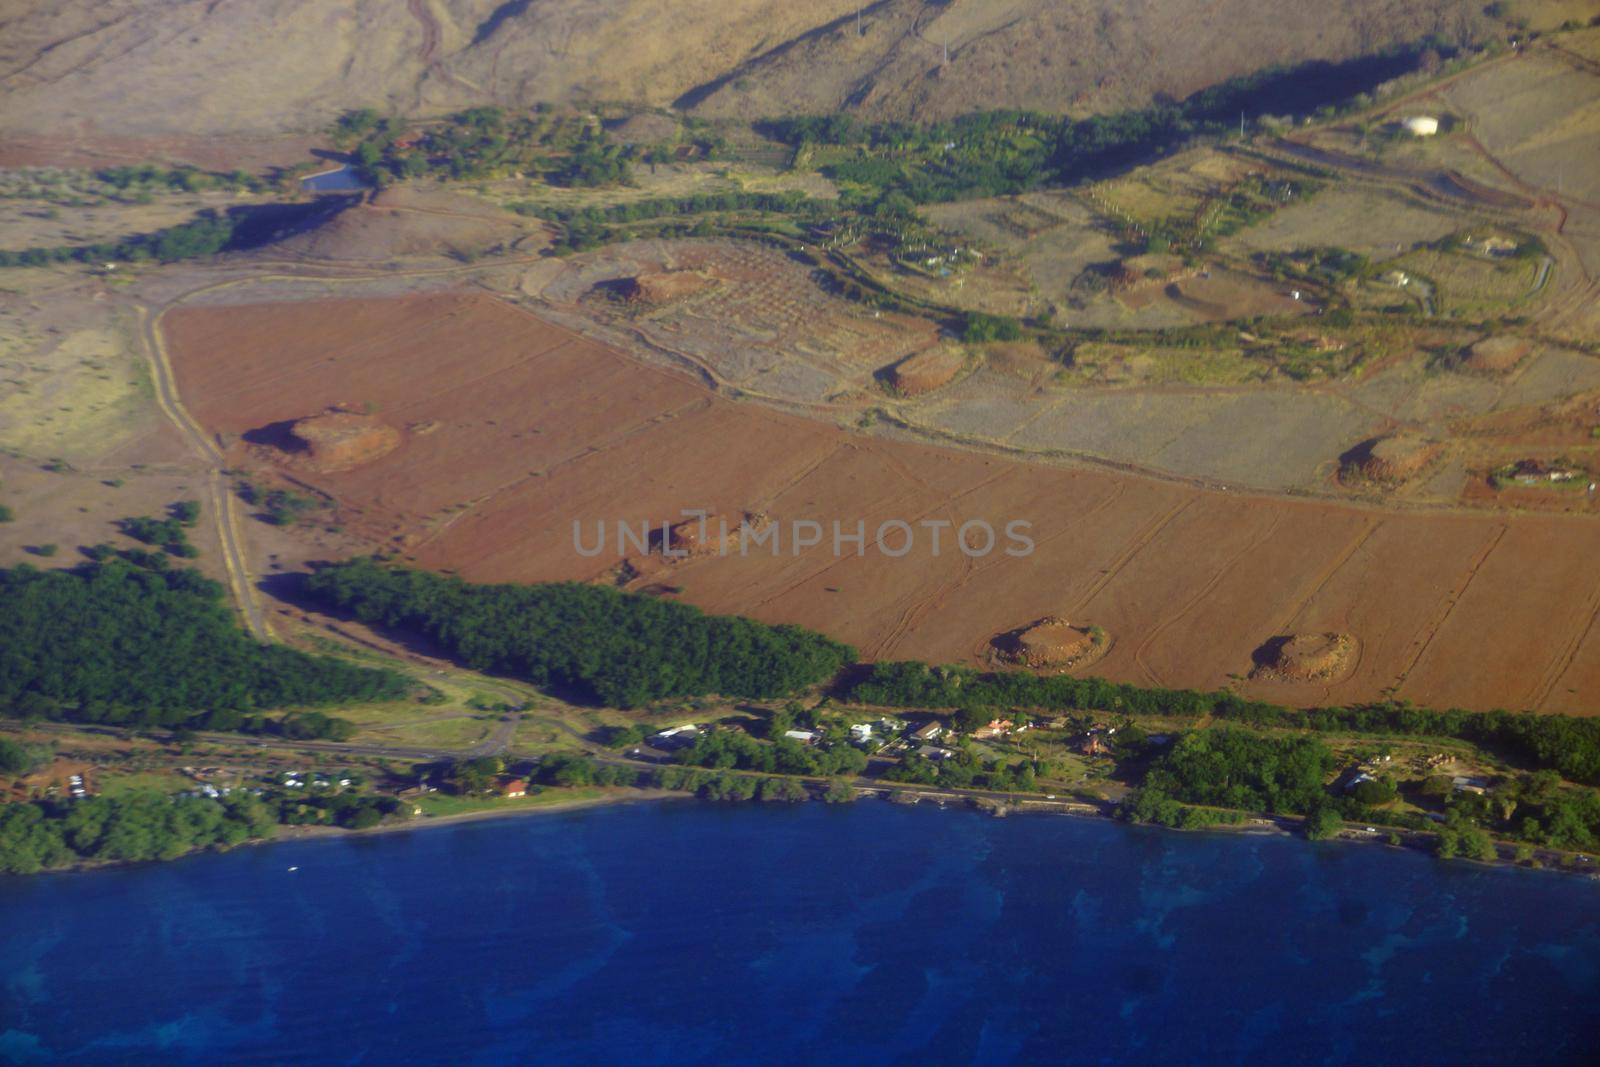 Aerial of coastline of Olowalu, Maui, Hawaii.  
Olowalu is a community on the west side of the island of Maui in the state of Hawaii. It is located about 4 miles south of Lahaina on the Honoapiʻilani Highway.                